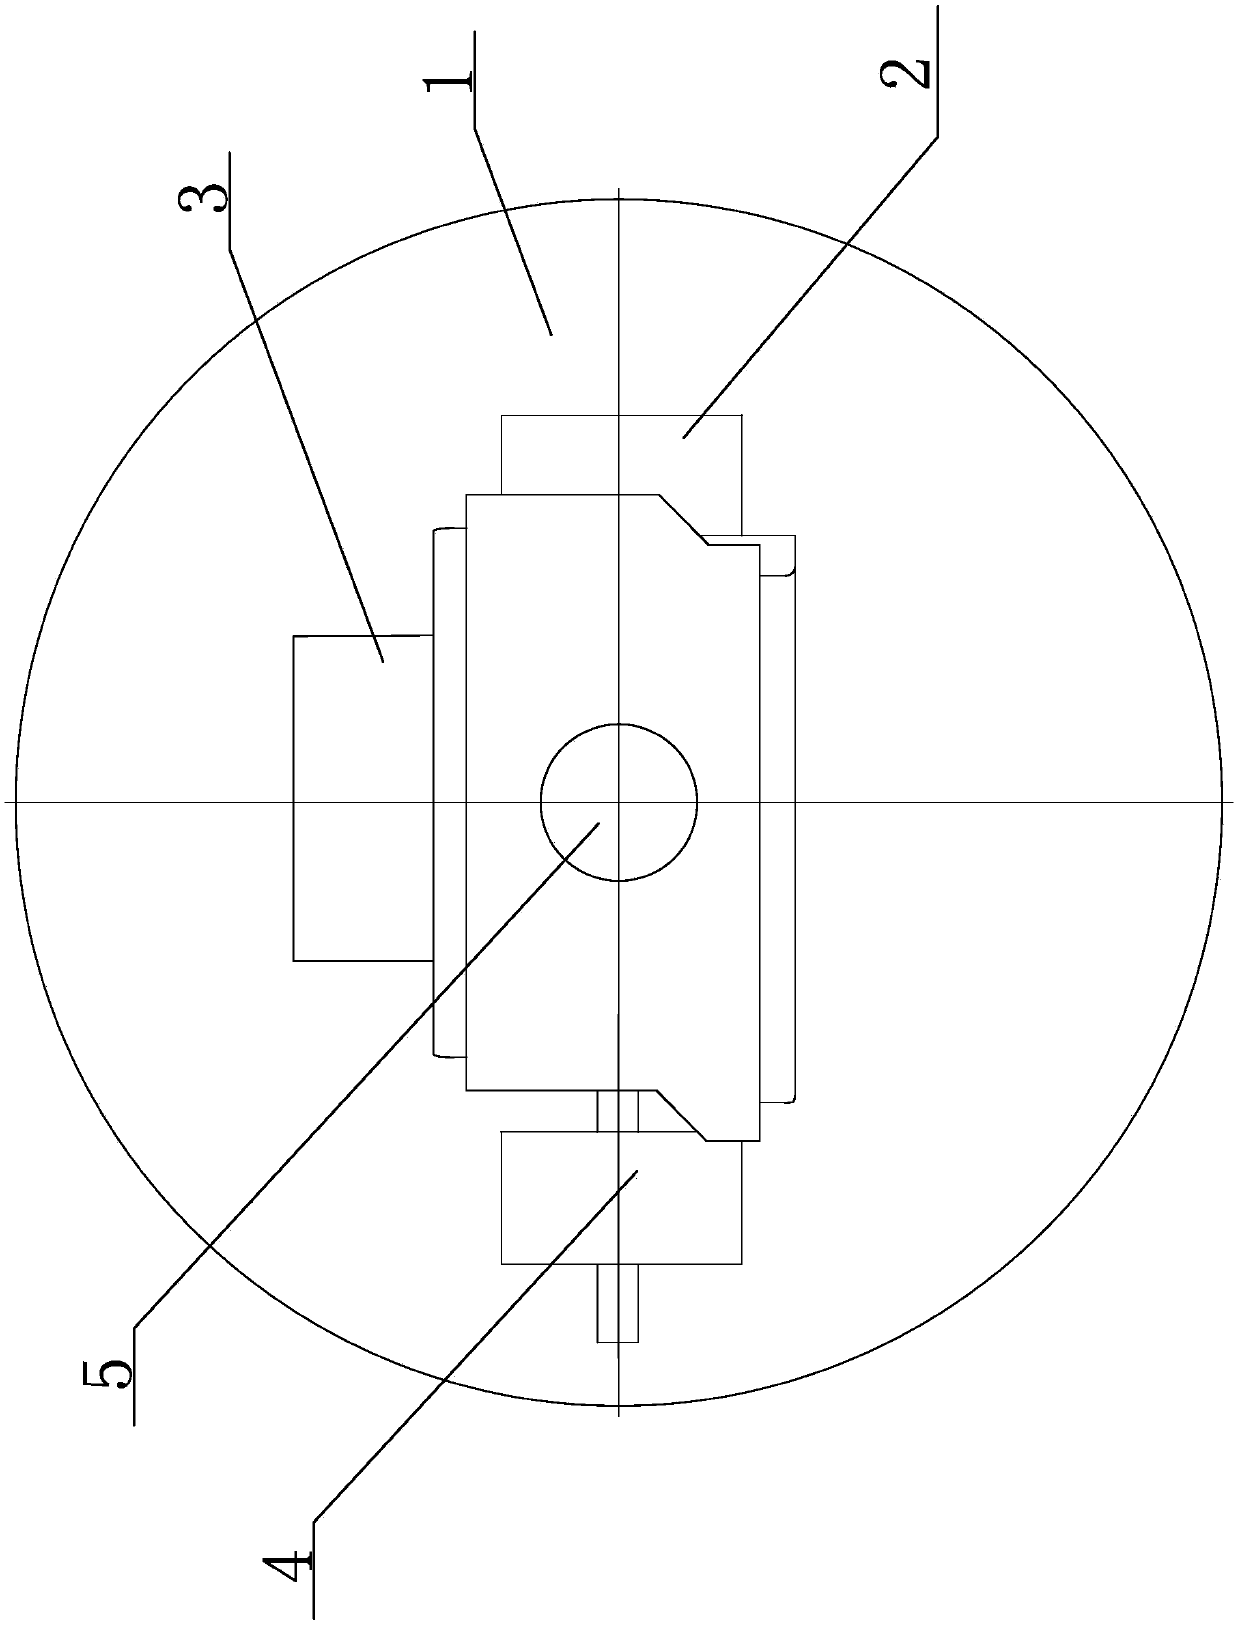 Positioning jig for adjusting stage blades and method for processing blade steam channel profiles by using the jig